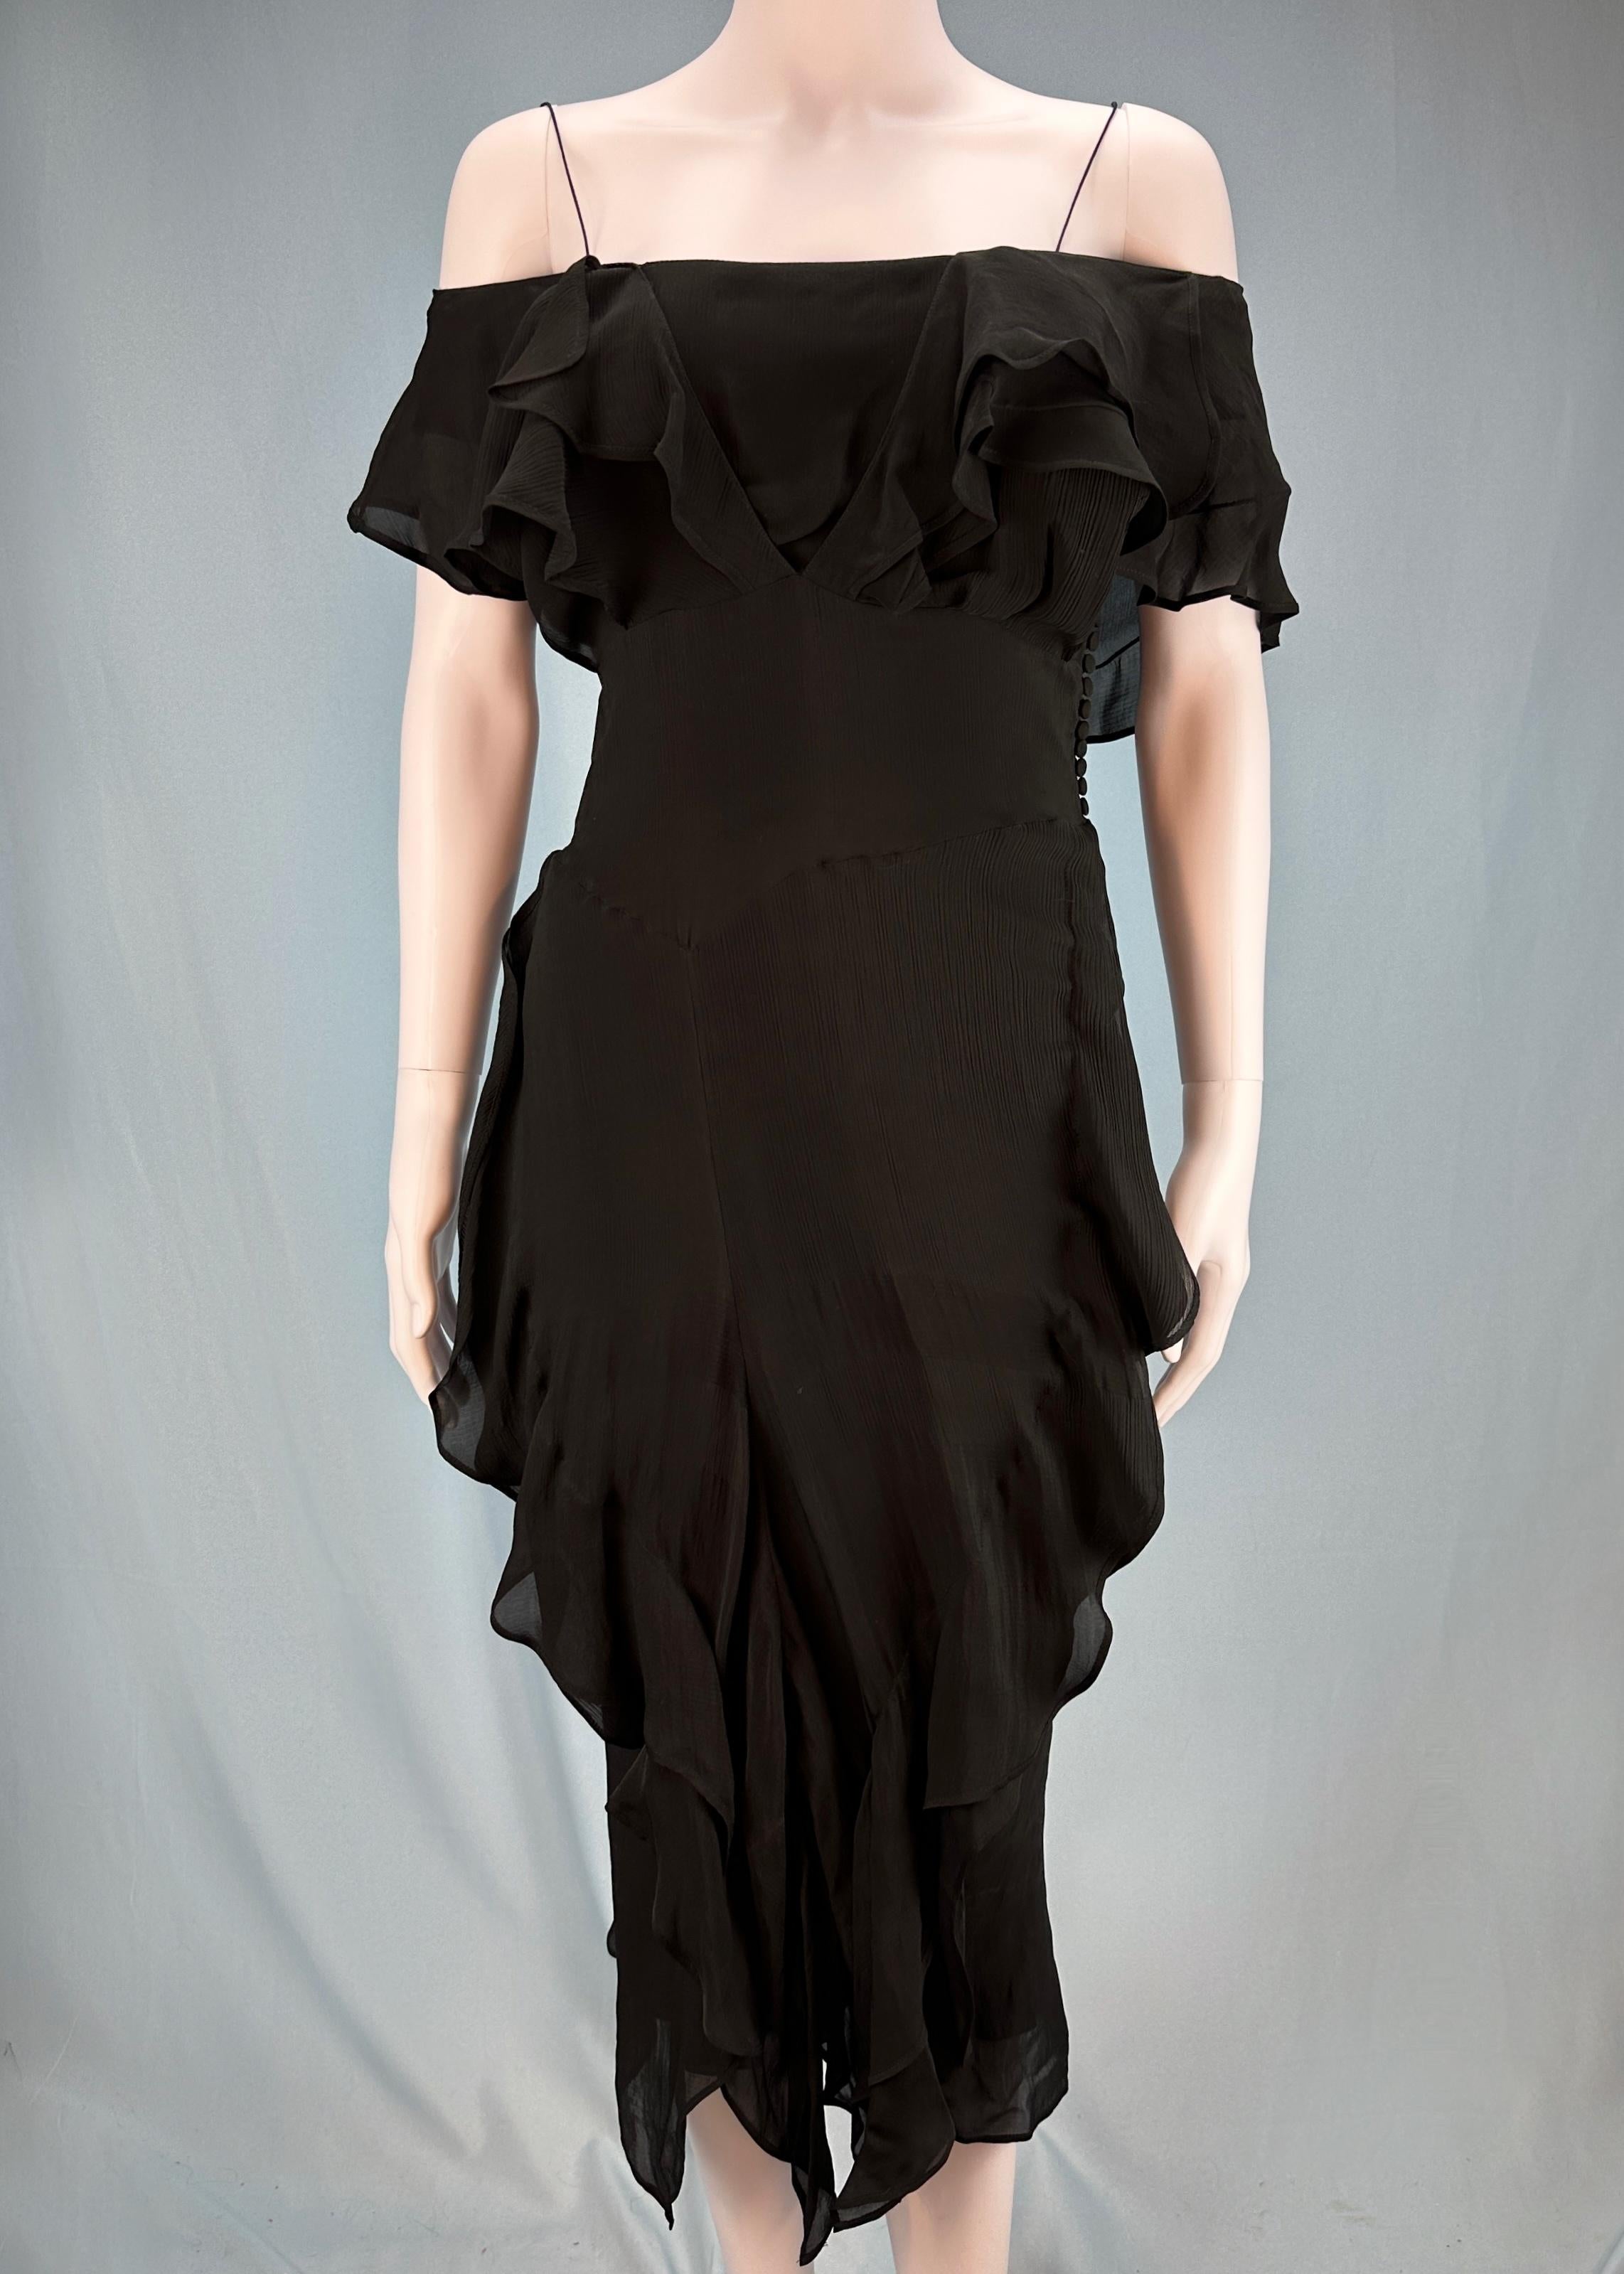 Vintage Dior
Fall 2006
by John Galliano 

Black silk chiffon ruffle detail dress
Midi length
Can be worn on or off shoulder 
Double layered - slip dress under ruffle dress, attached together
Silk covered buttons up one side 

Size UK 8 / US 4